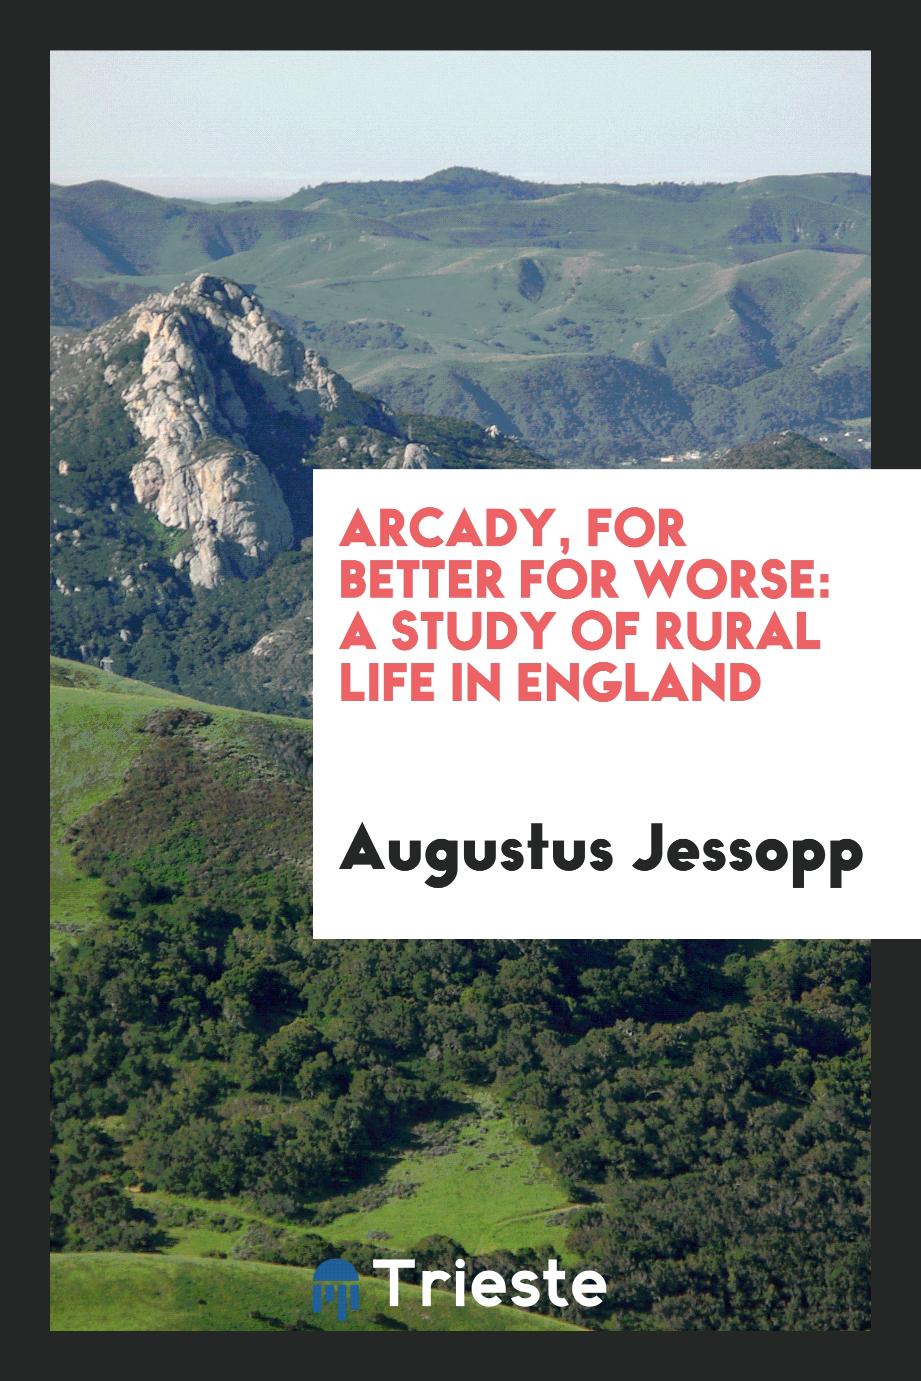 Arcady, for Better for Worse: A Study of Rural Life in England